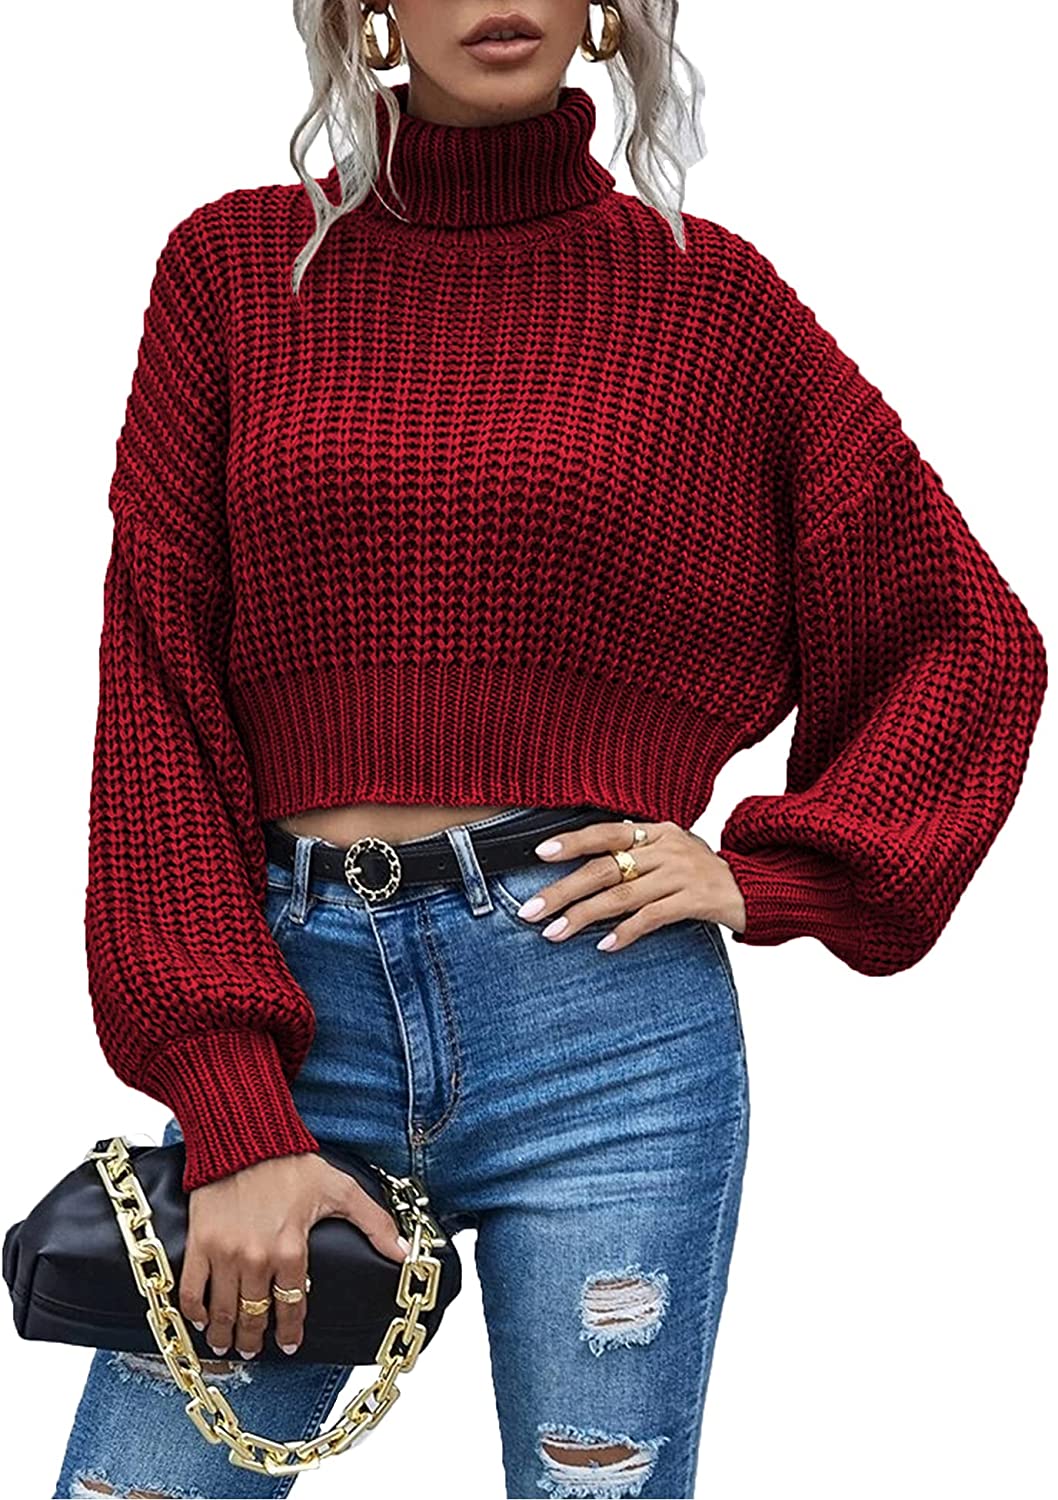 Chigant Knit Pullover Sweater Women Deep V Neck Loose Fit Pullover Long Sleeve Oversized Jumper Tops S-XXL 